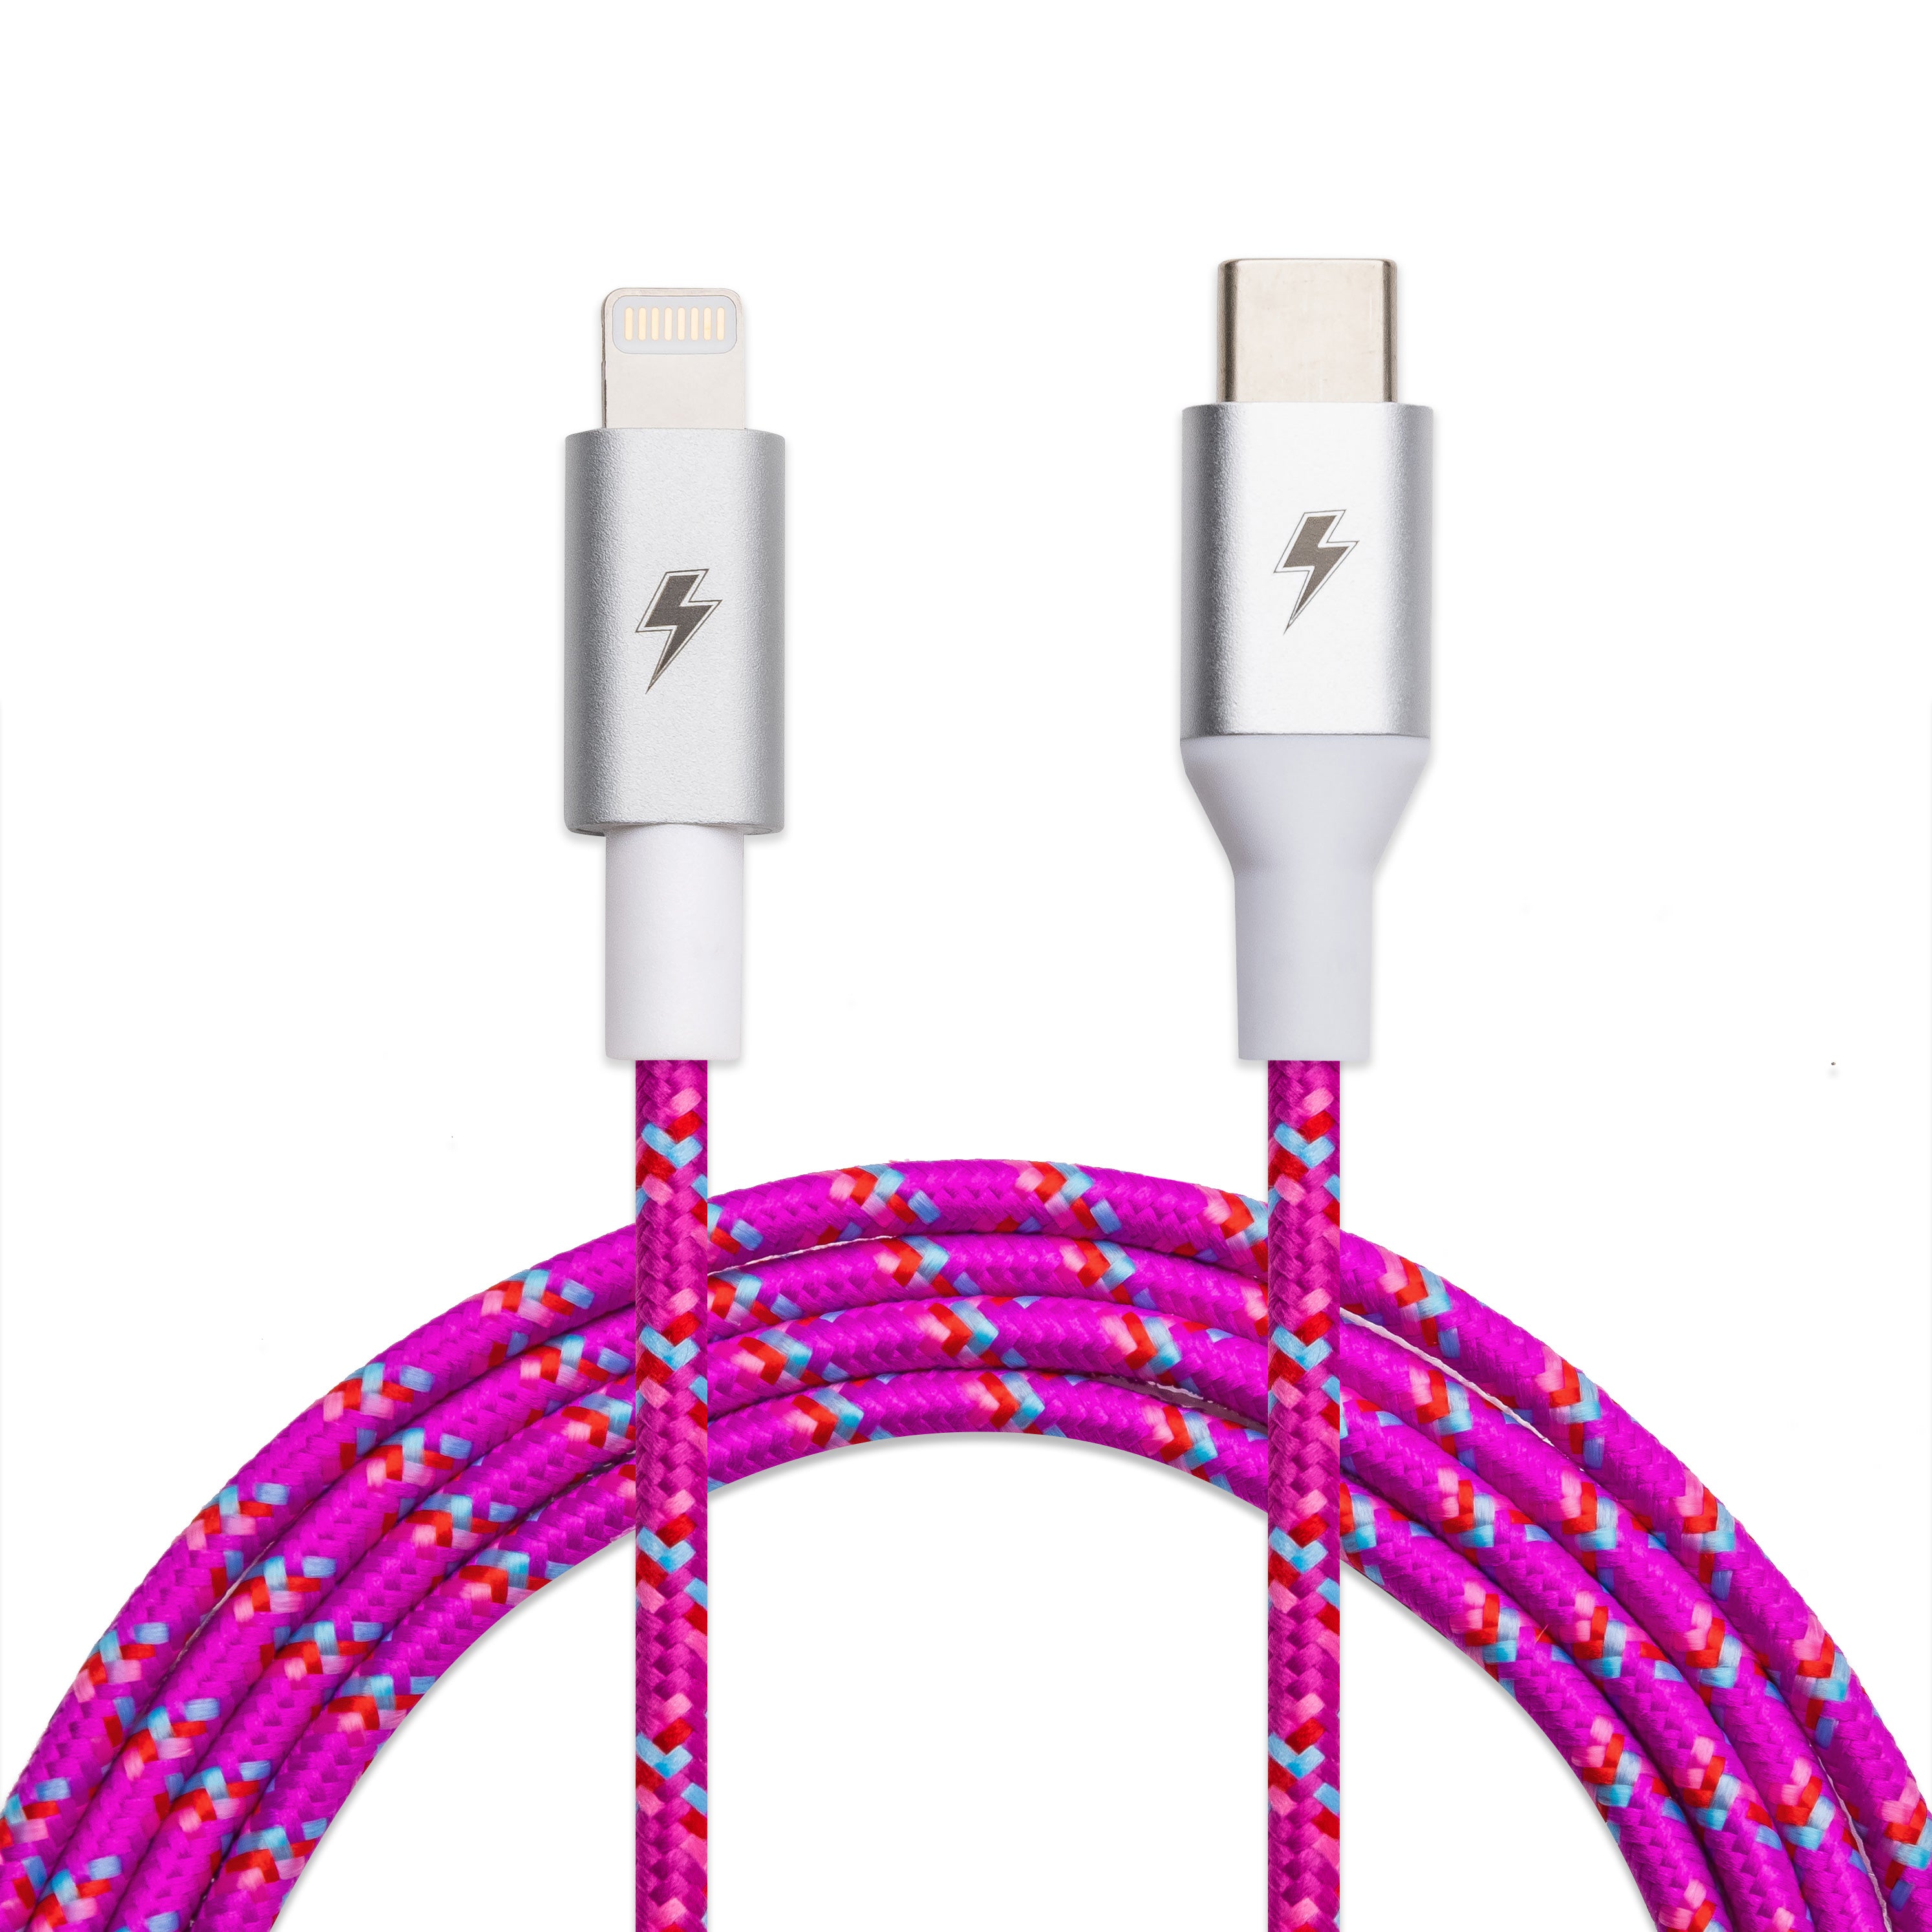 Lime Glow Lightning Cable [10 ft / 3m length] – Charge Cords